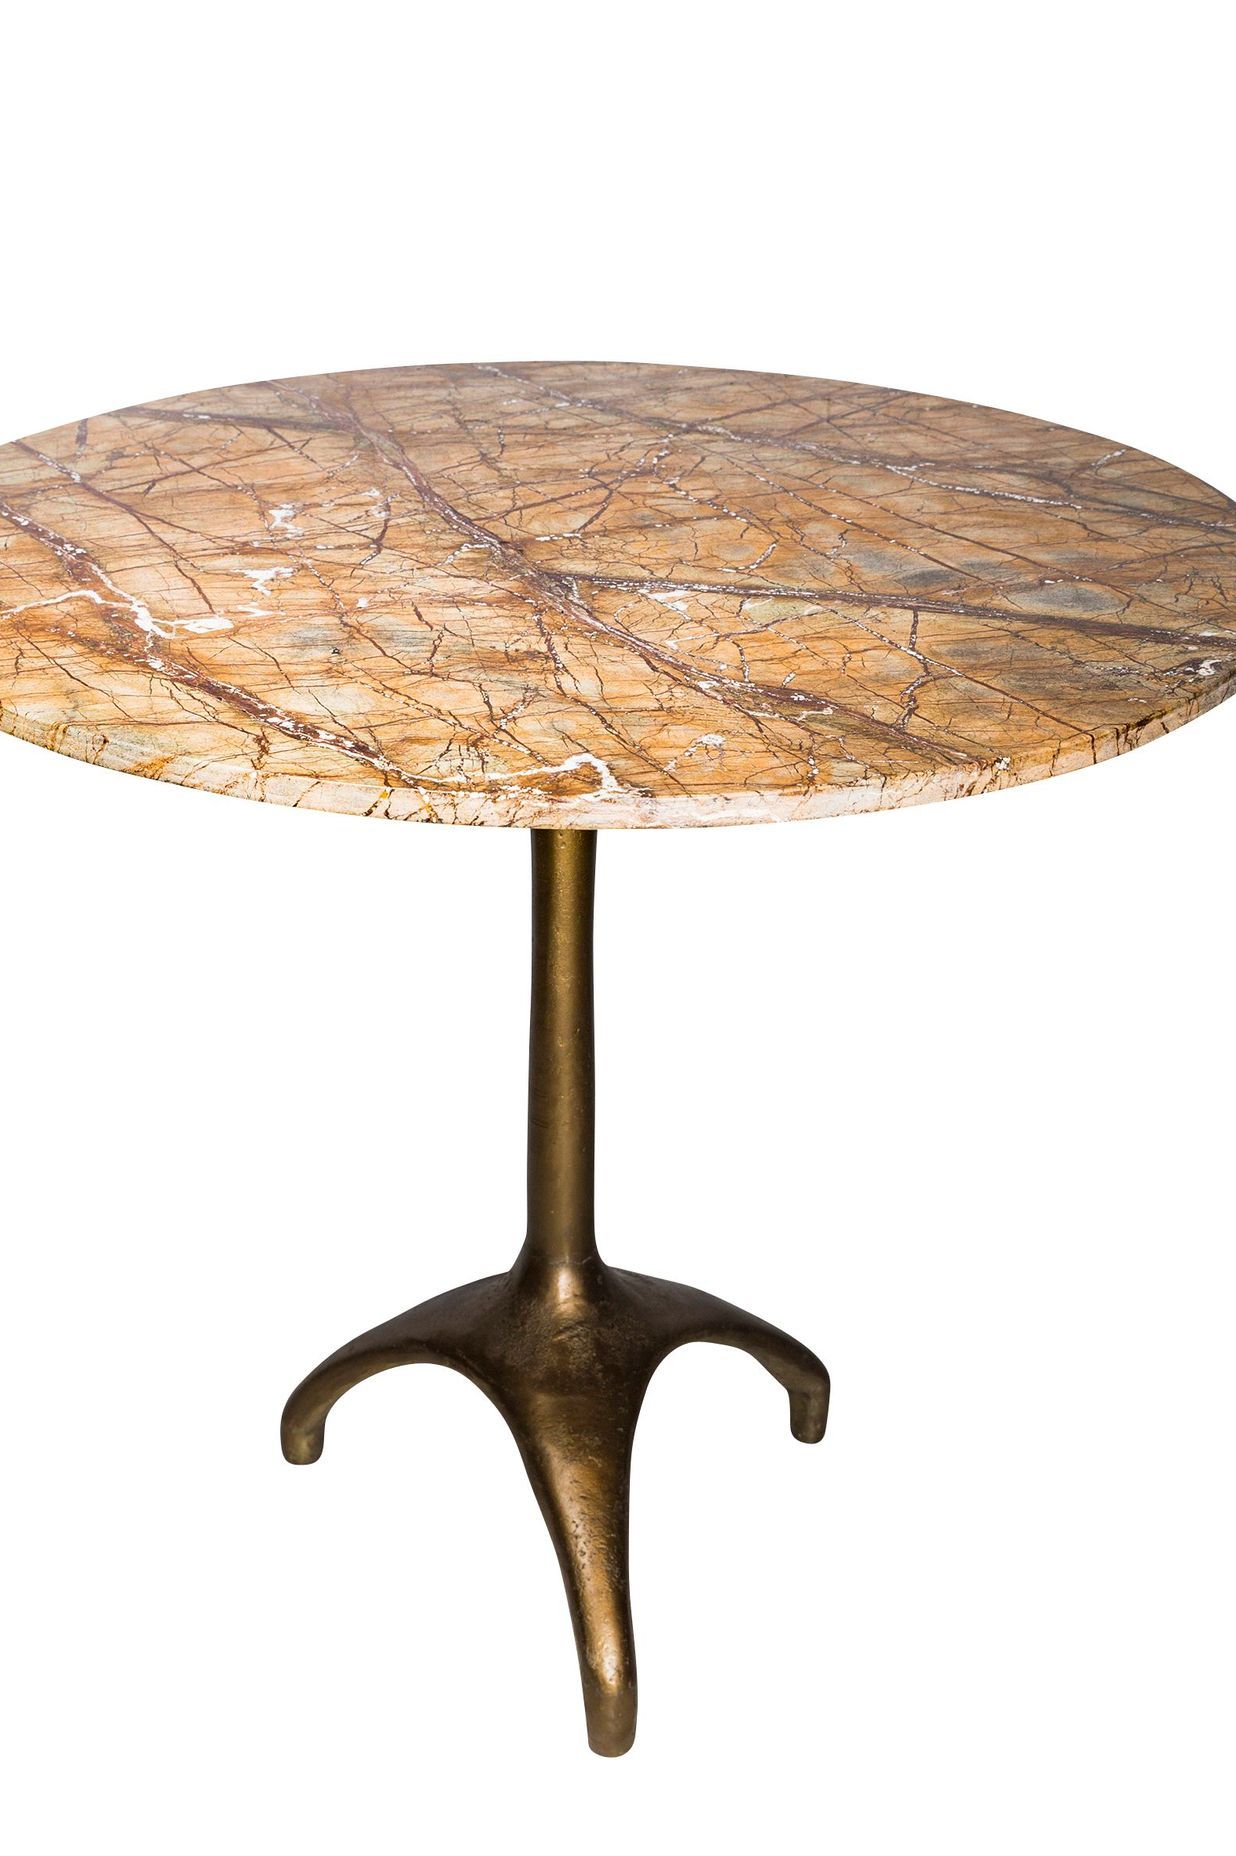 Seine marble table, French Country Collections